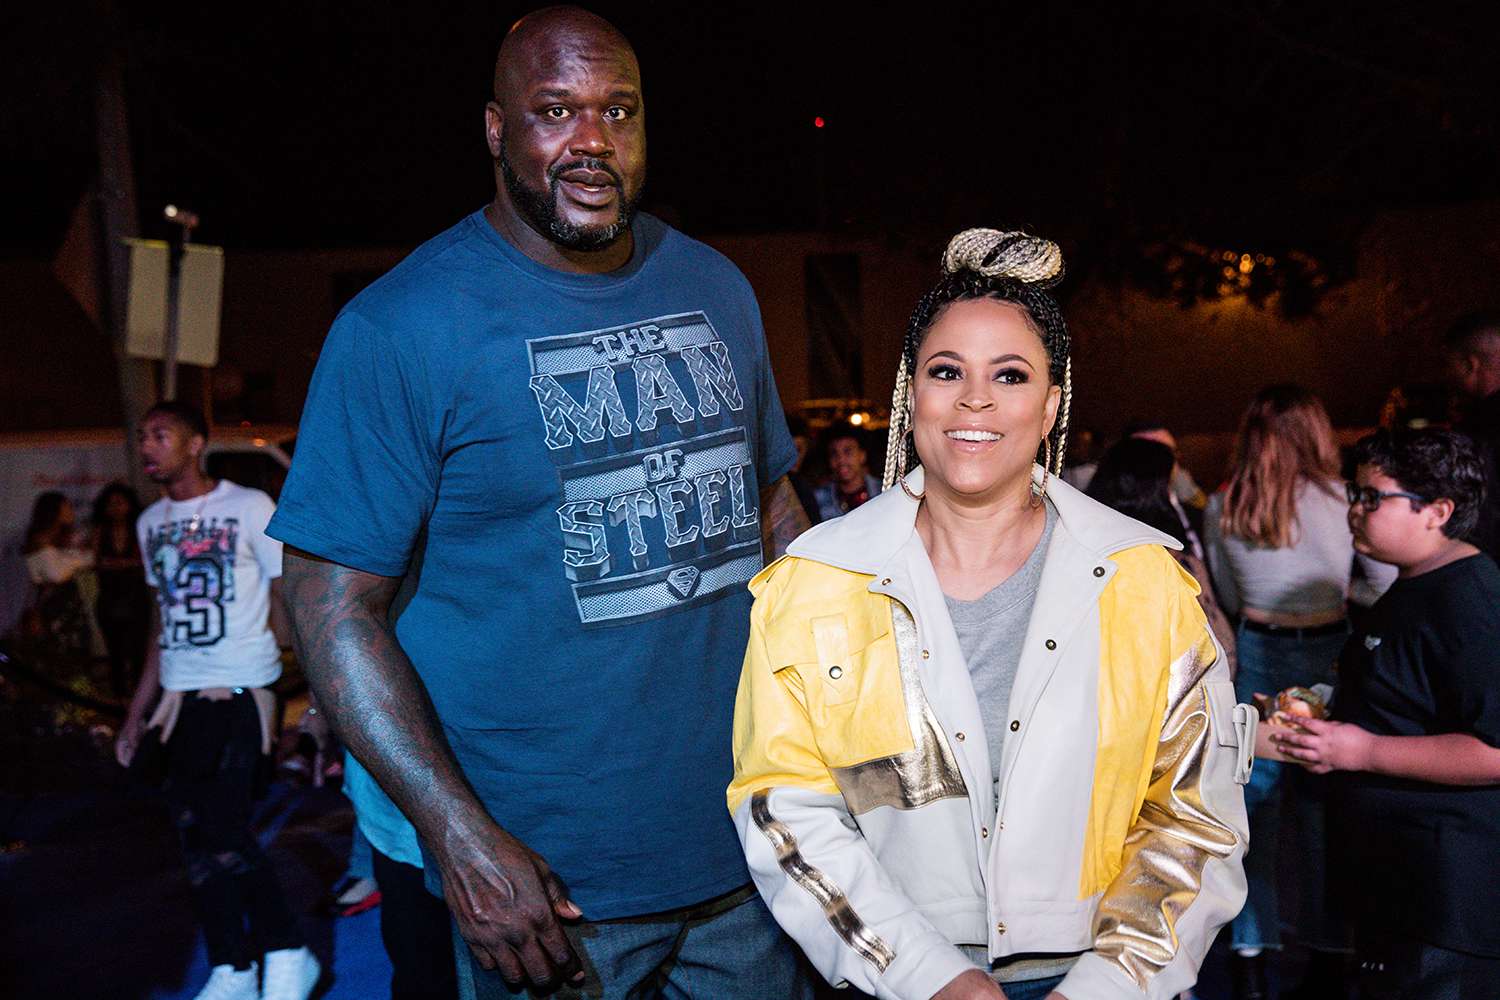 Shaquille O'Neal's Ex-Wife Shaunie Says She's Not Sure She Ever Loved Him — and He Says 'I Understand'